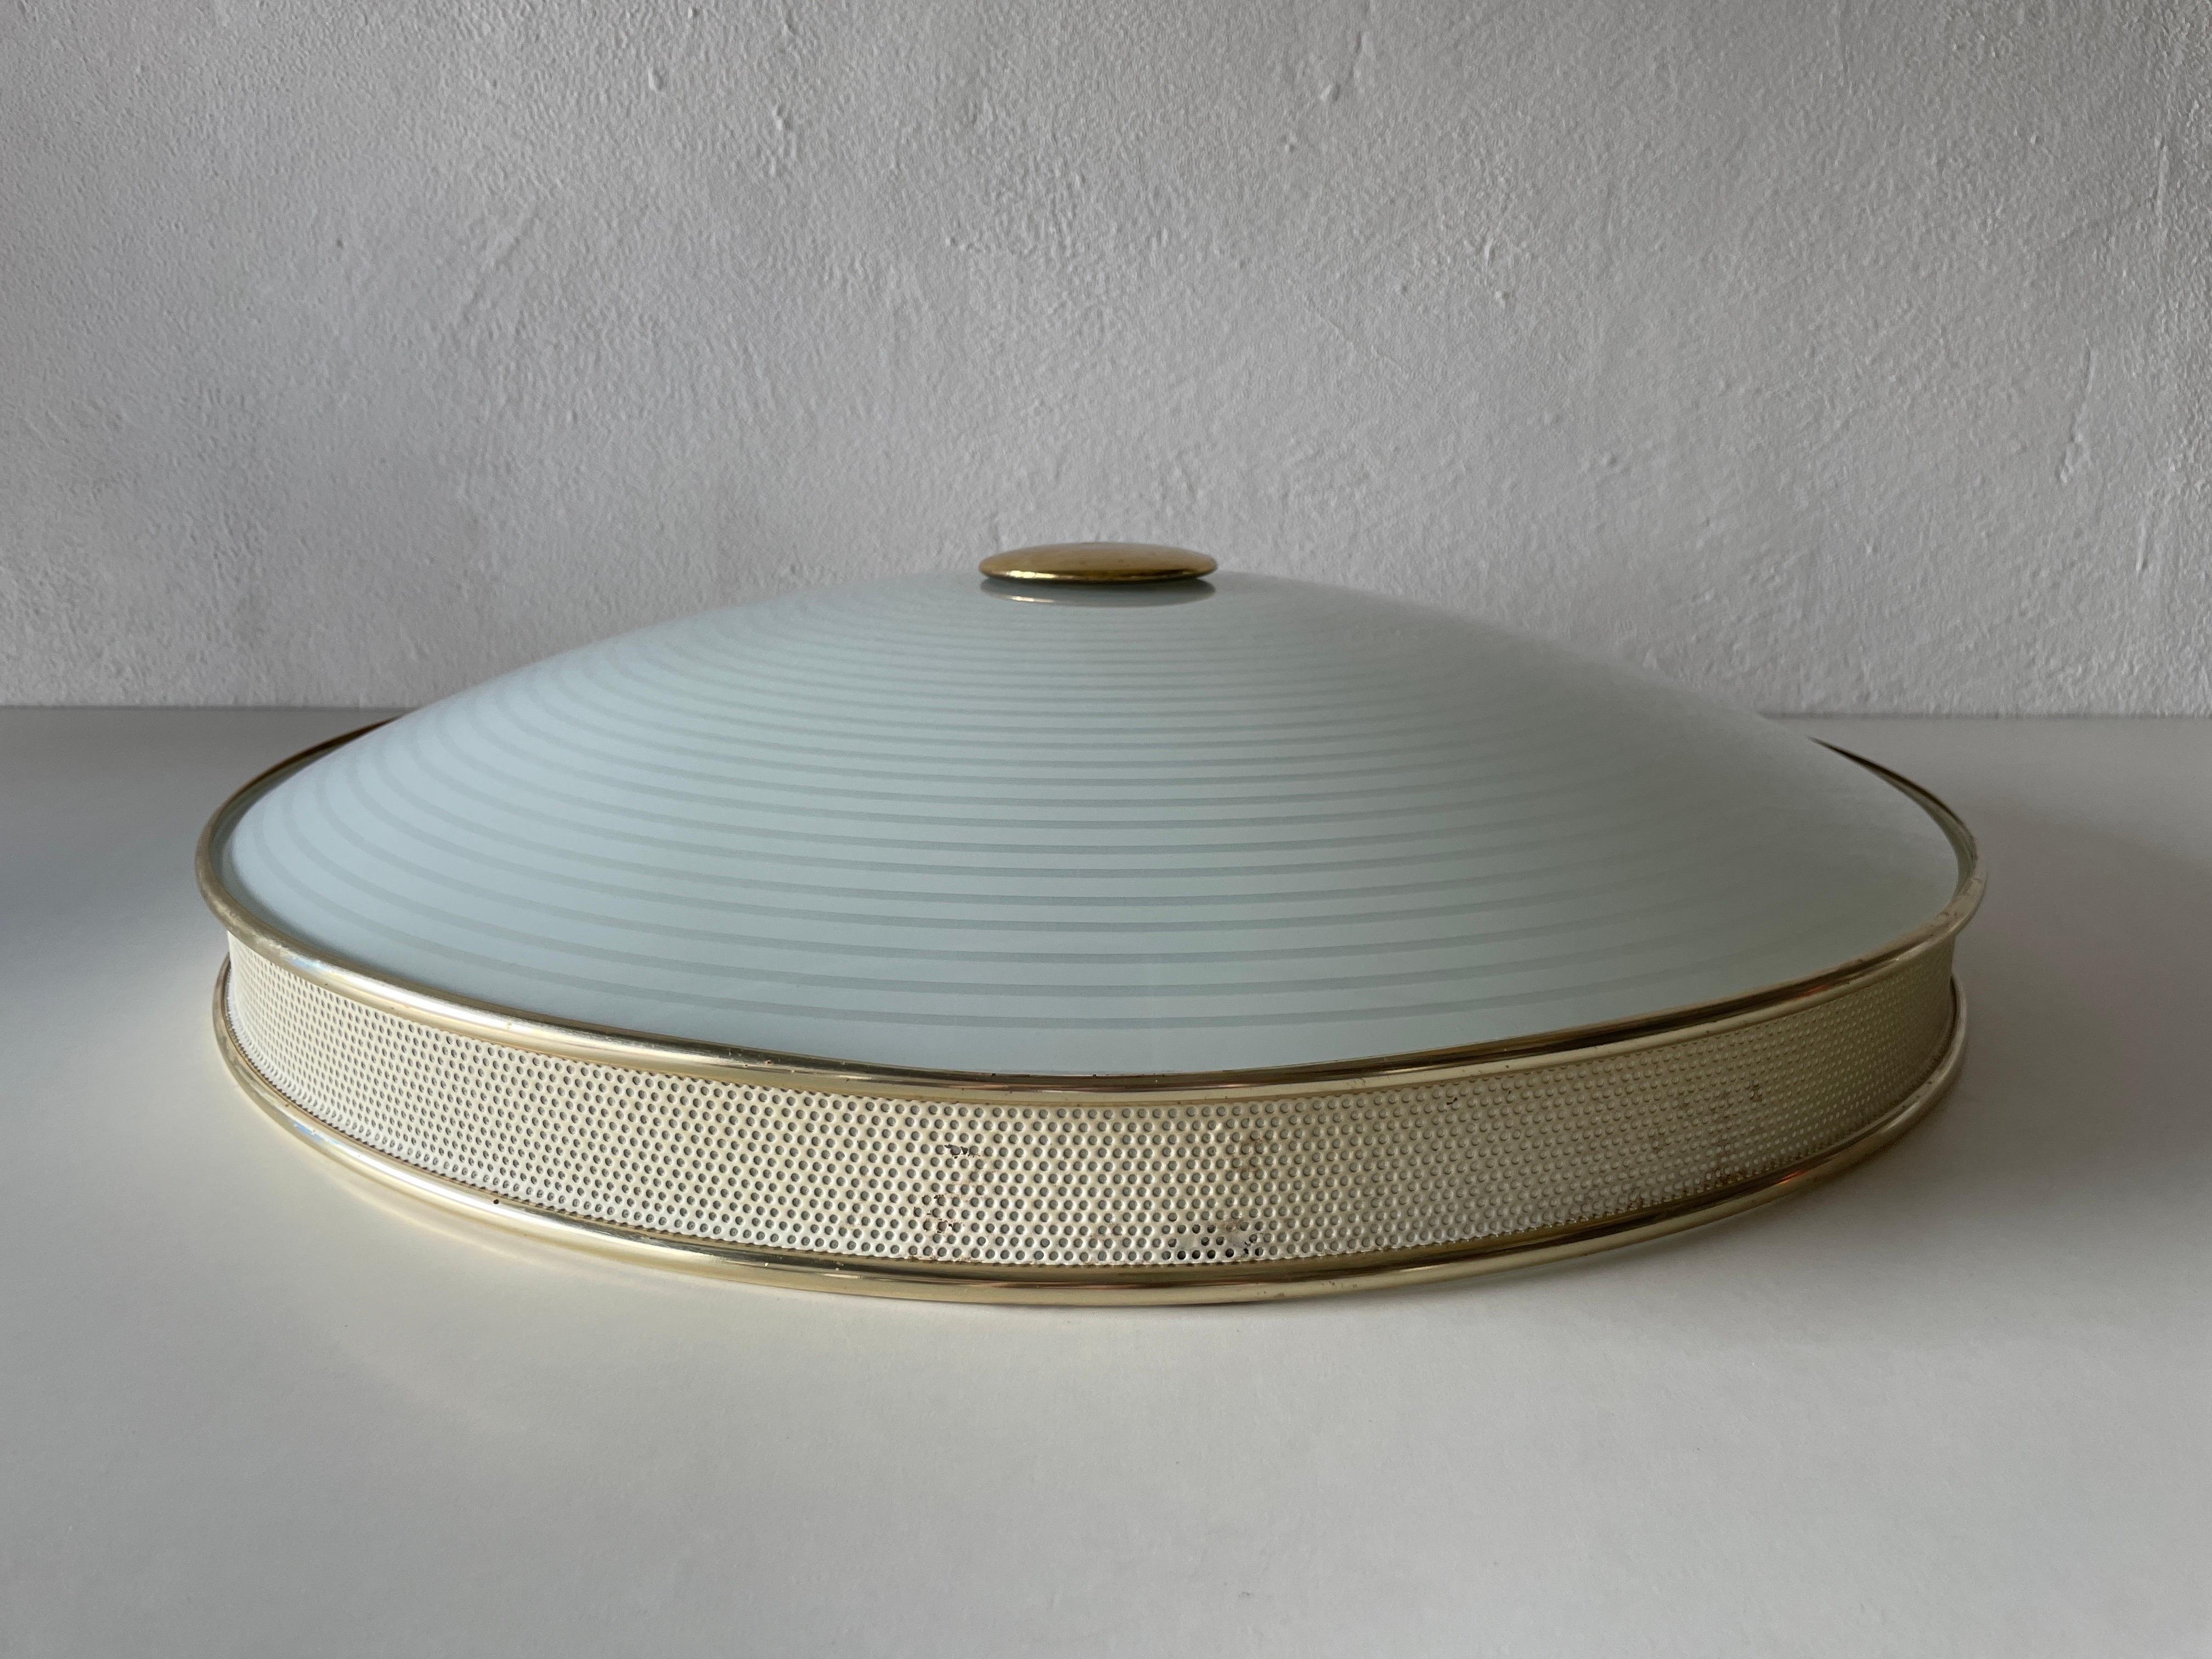 Ufo Design Glass Metal Flush Mount Ceiling Lamp by Hillebrand, 1950s, Germany For Sale 1